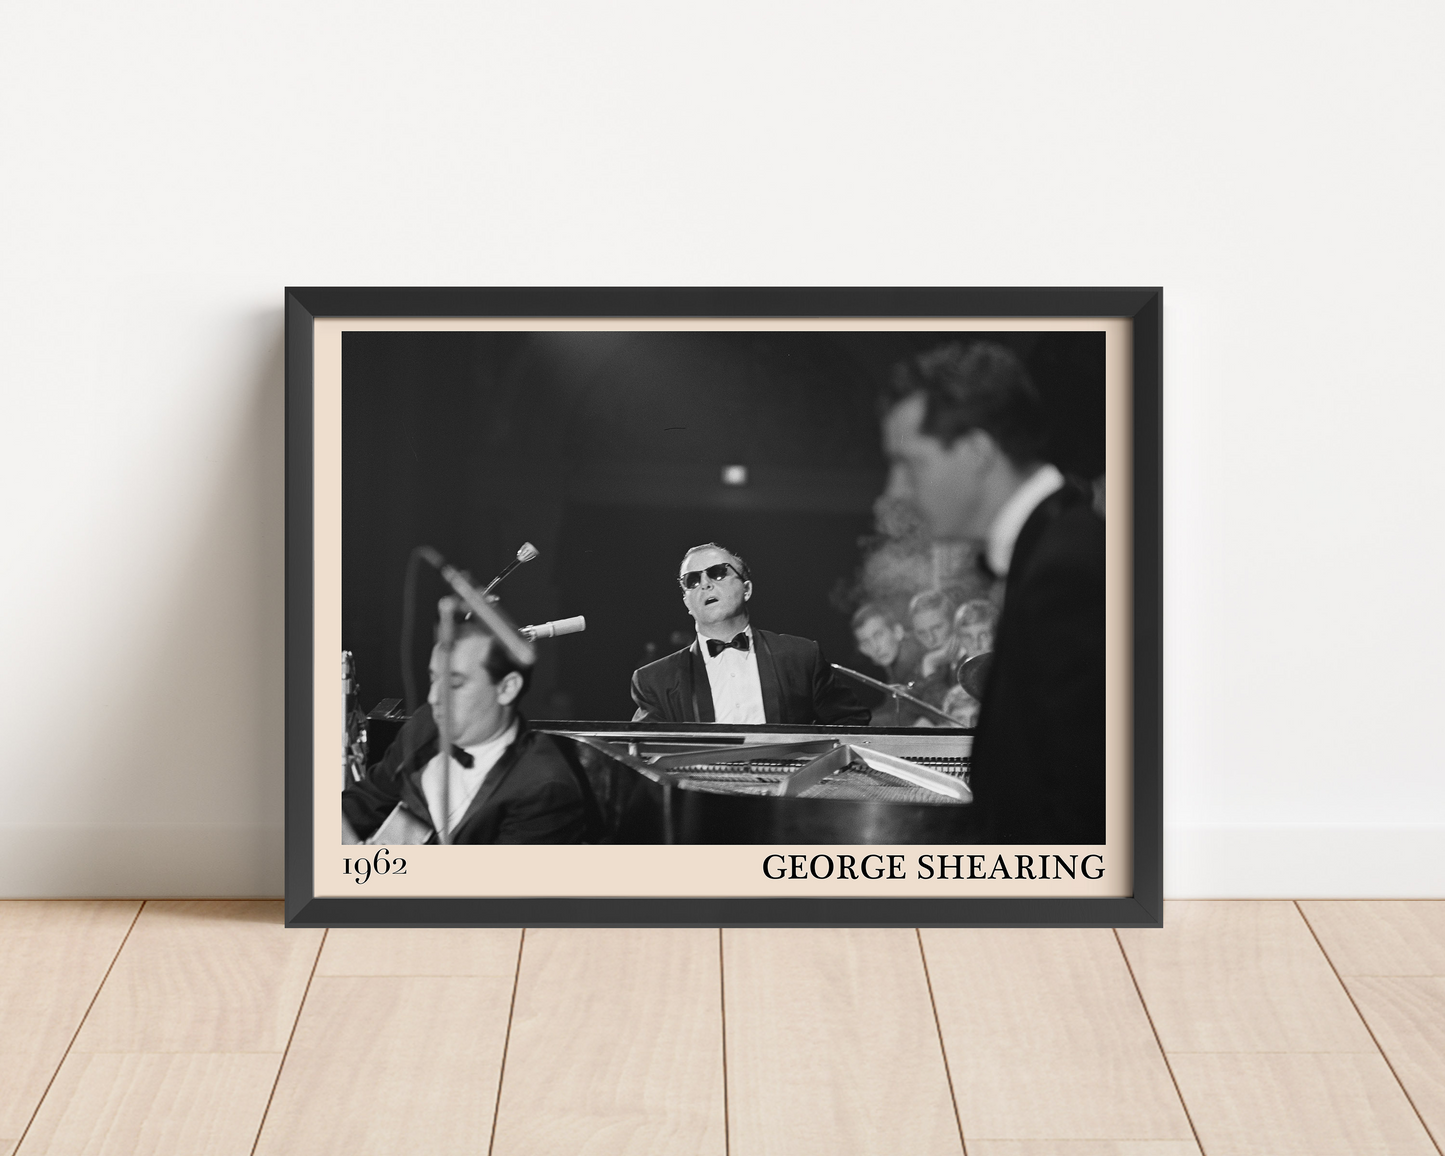 1962 picture of George Shearing playing piano. Picture crafted into a black framed poster, with an off-white border. Poster is propped against a white wall